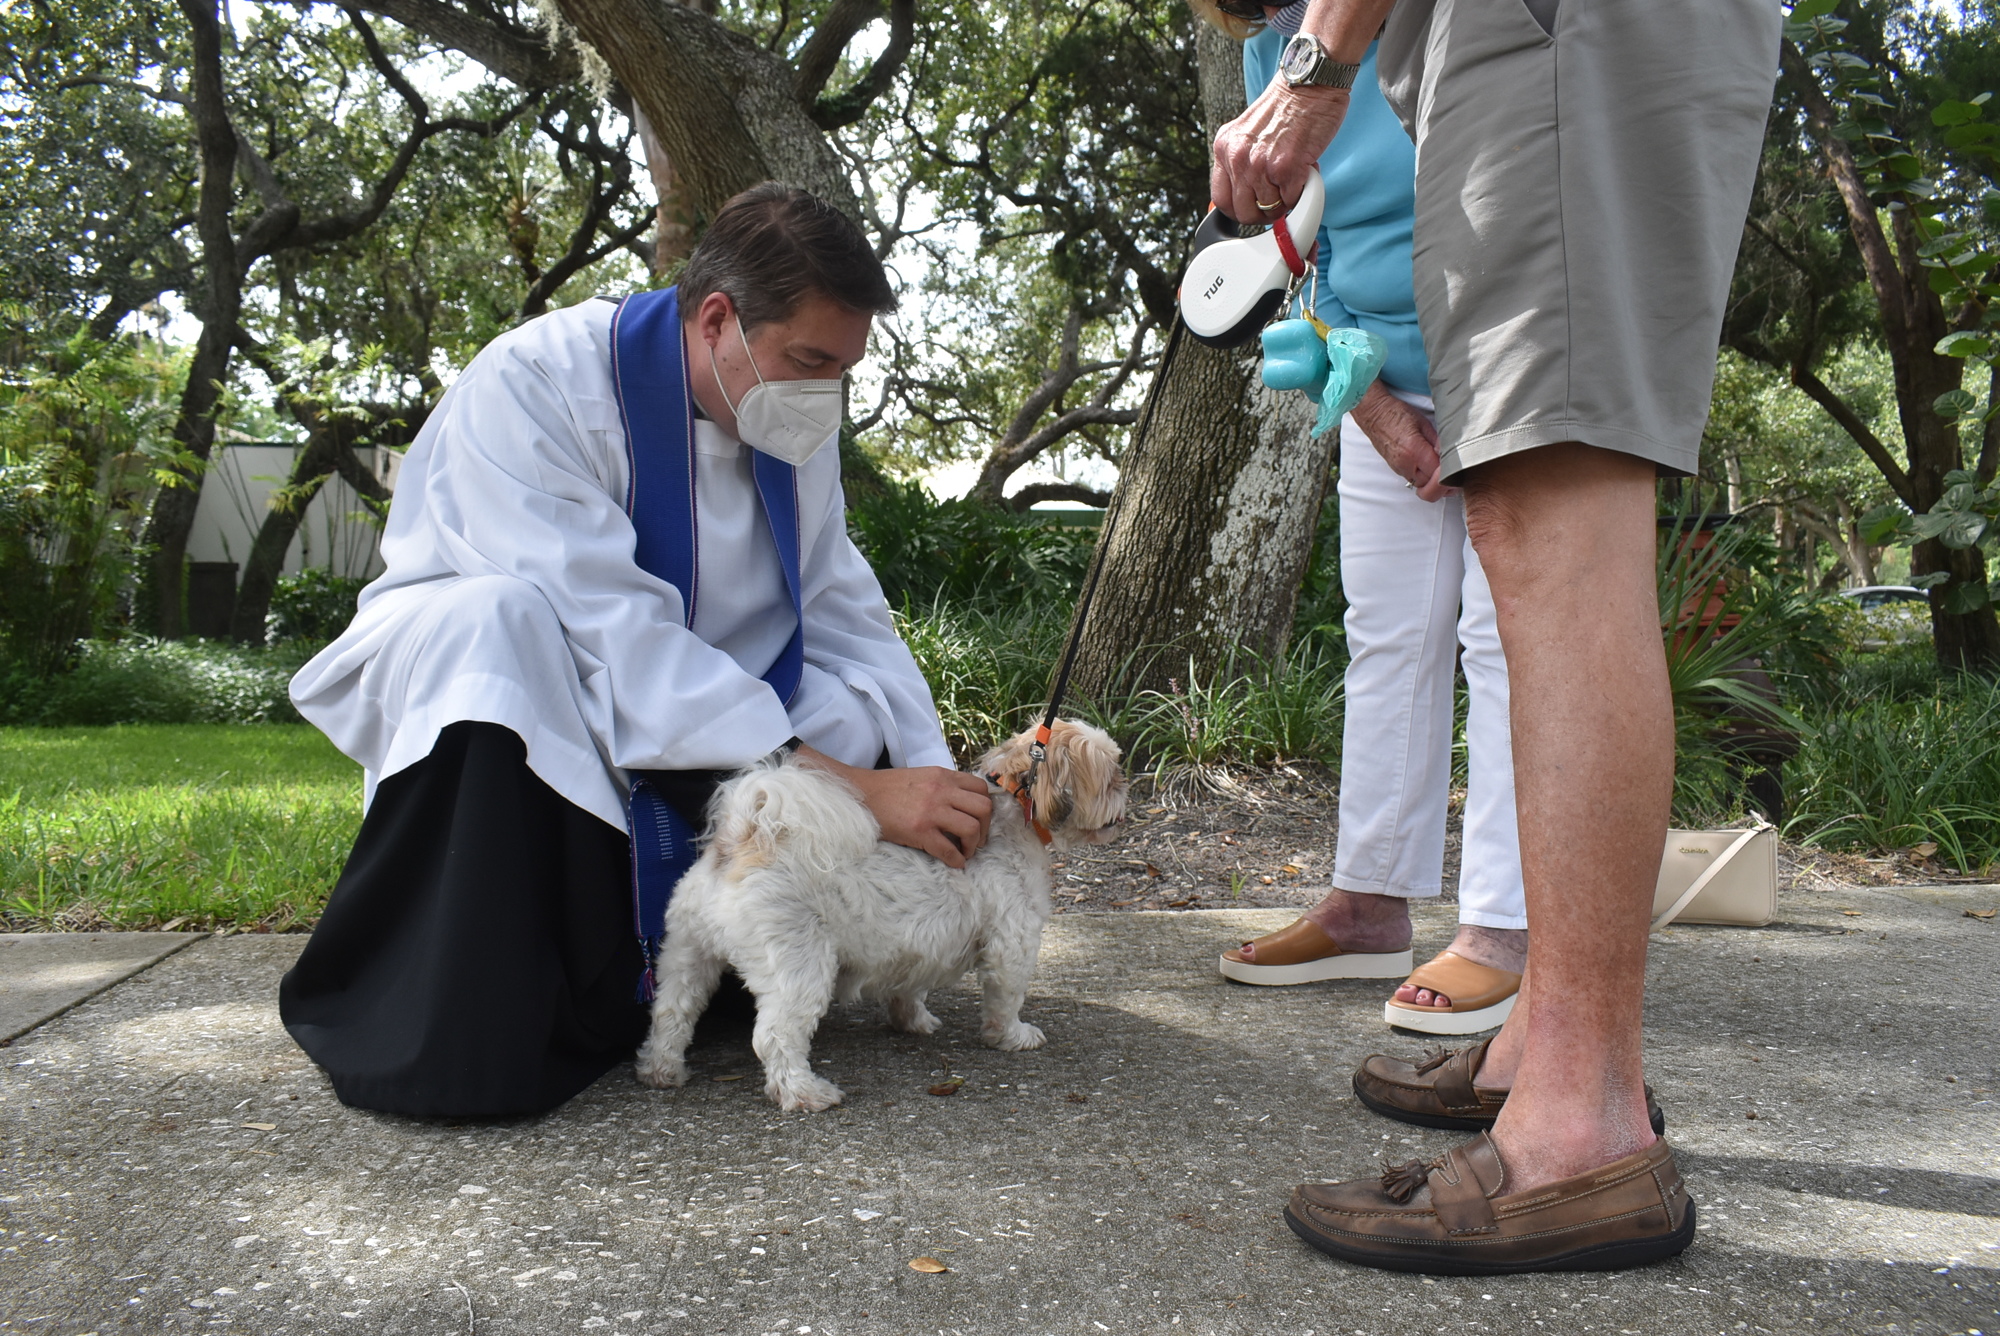 Father Dave Marshall blesses Oct. 8: Buddy Ortiz, as his humans, Ed and Mary, watch.